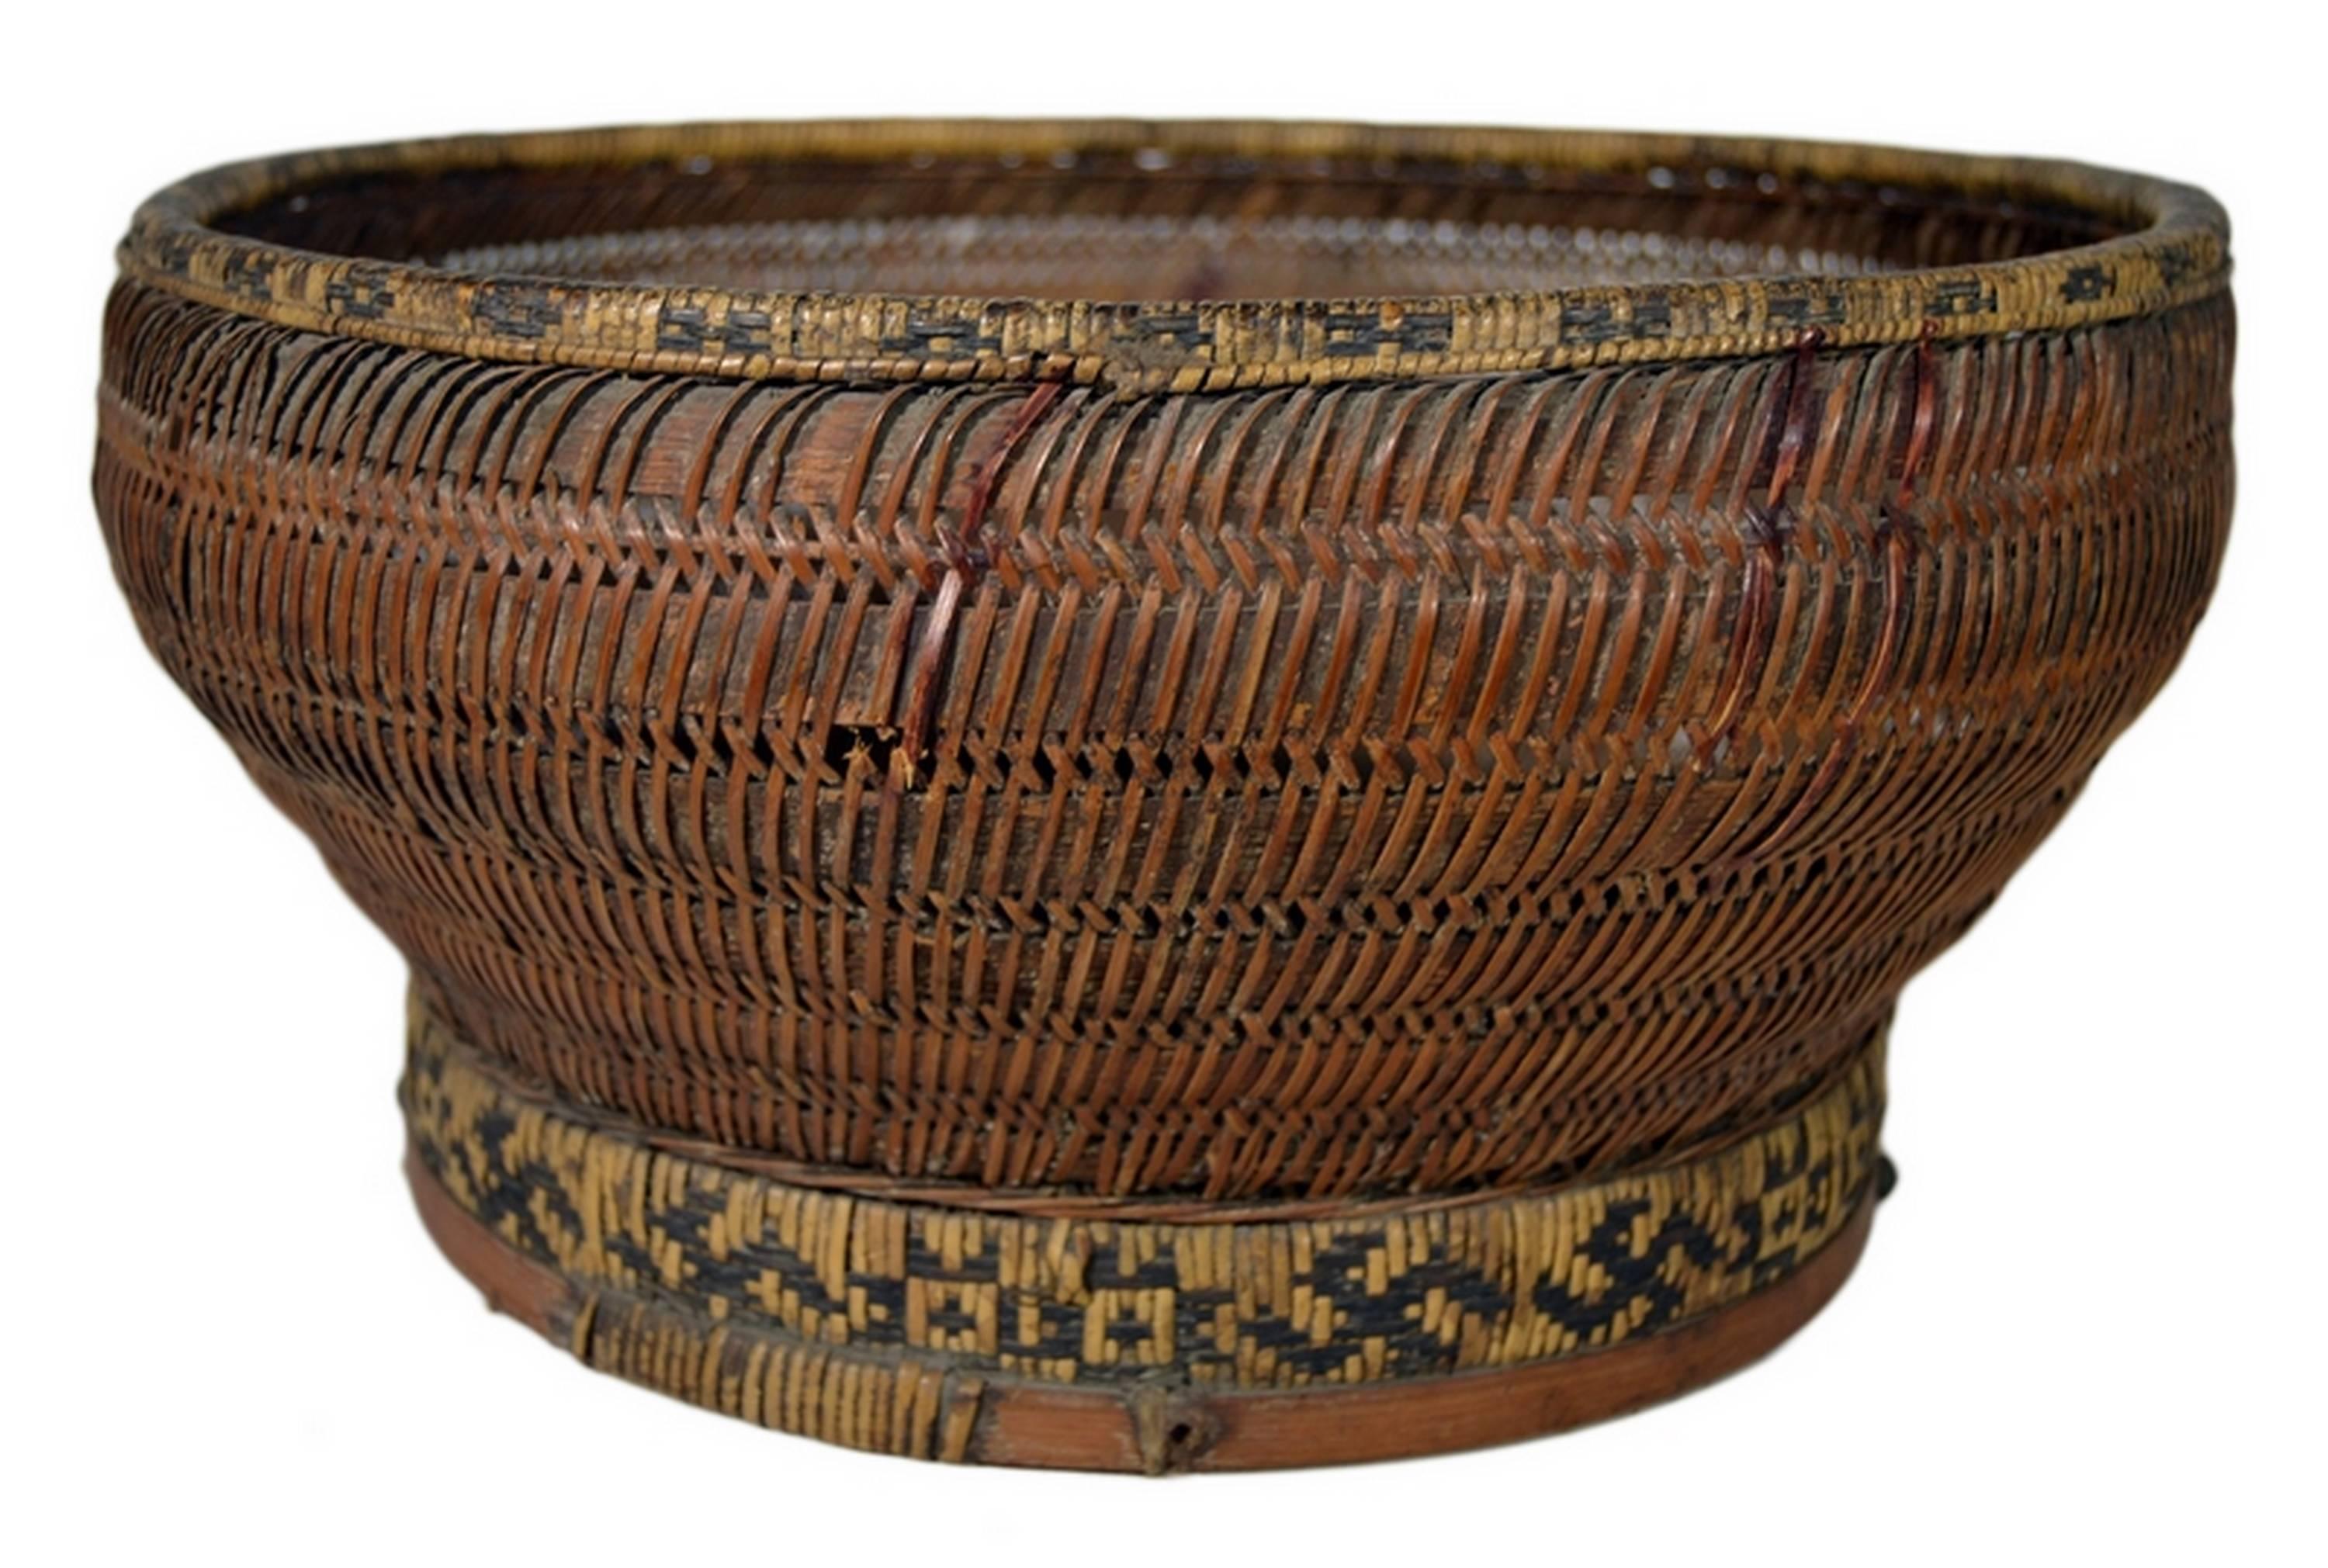 Hand-Crafted Antique Handwoven Cane and Bamboo Grain Basket from 19th Century, China